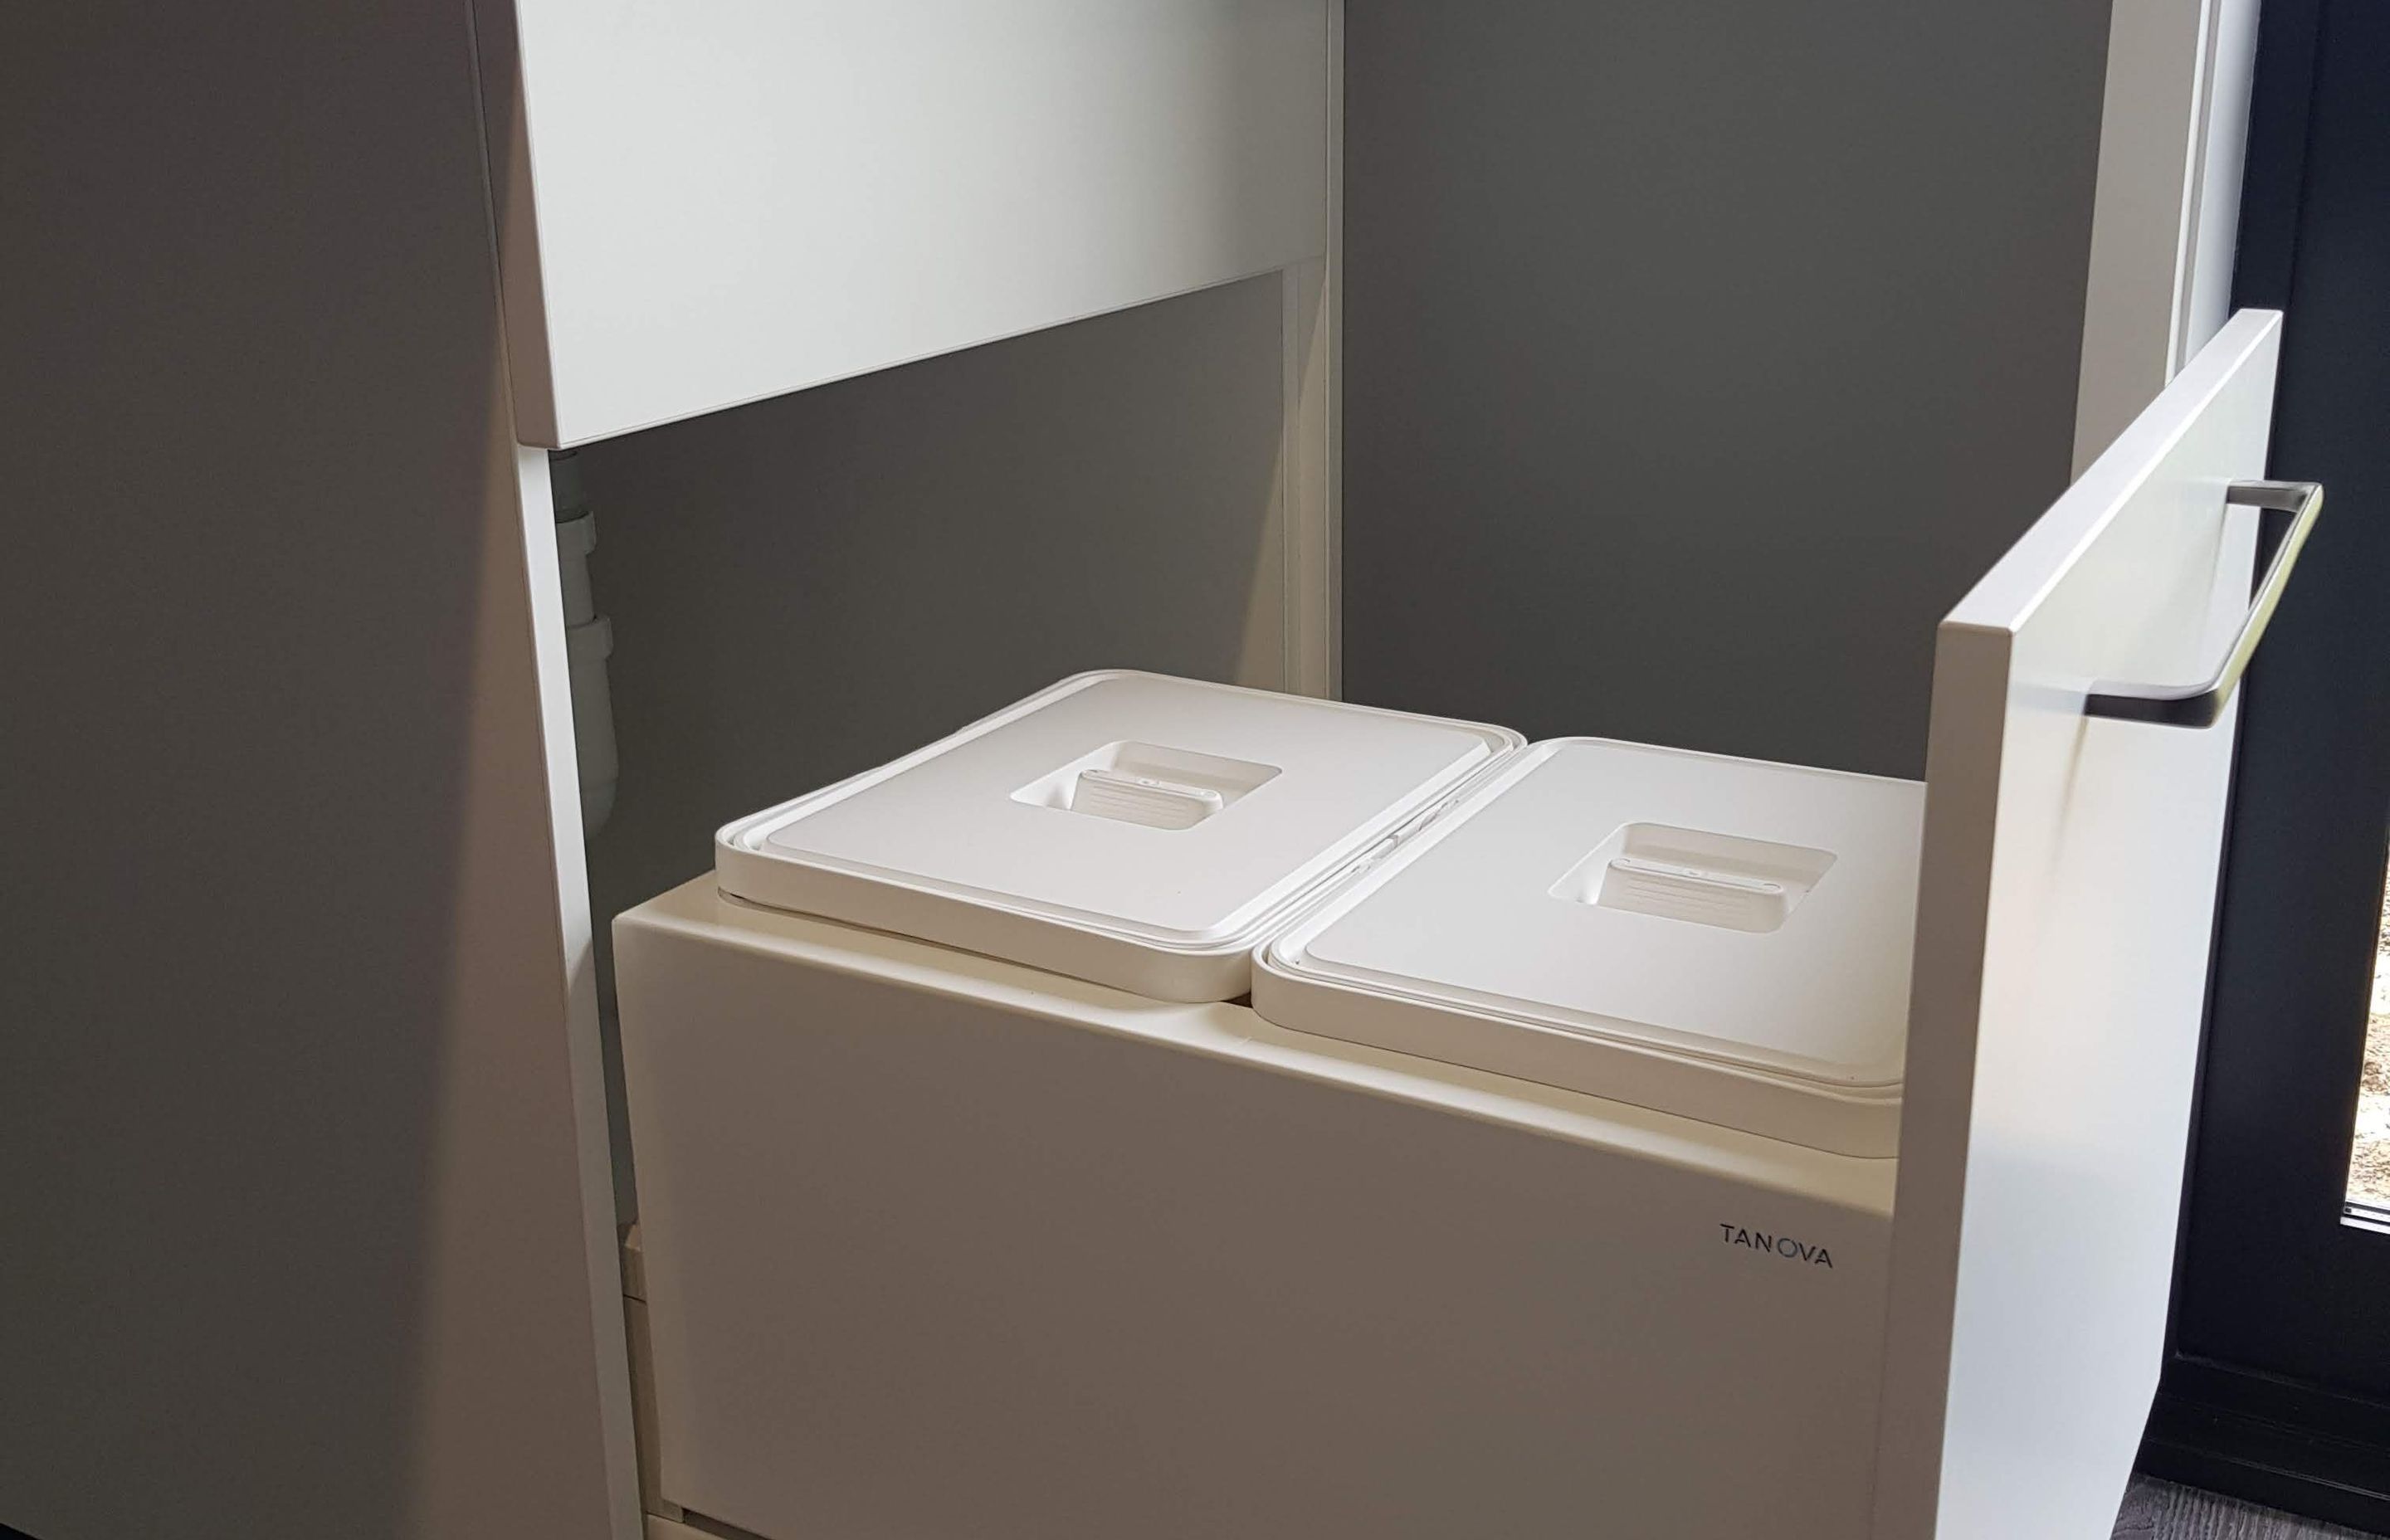 Tanova Drawer Frame and Bucket Kitchen Bin Installed in Laundry as a Soak Centre